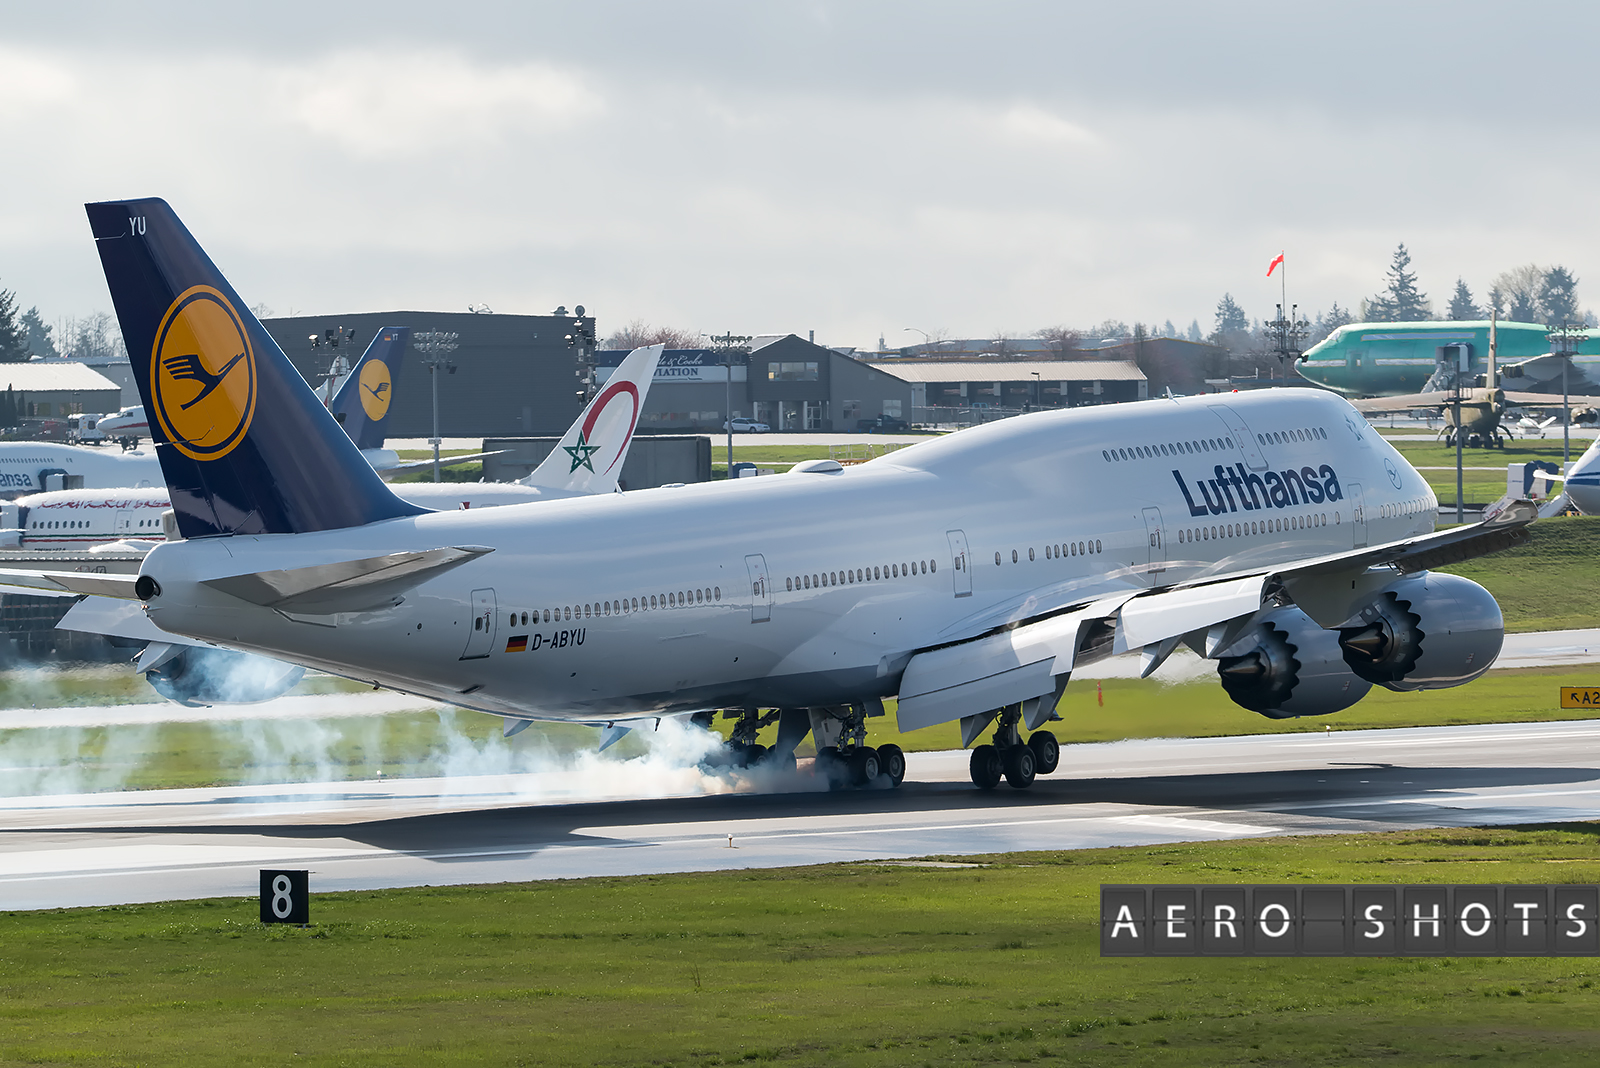 D-ABYU in Paine Field (PAE)